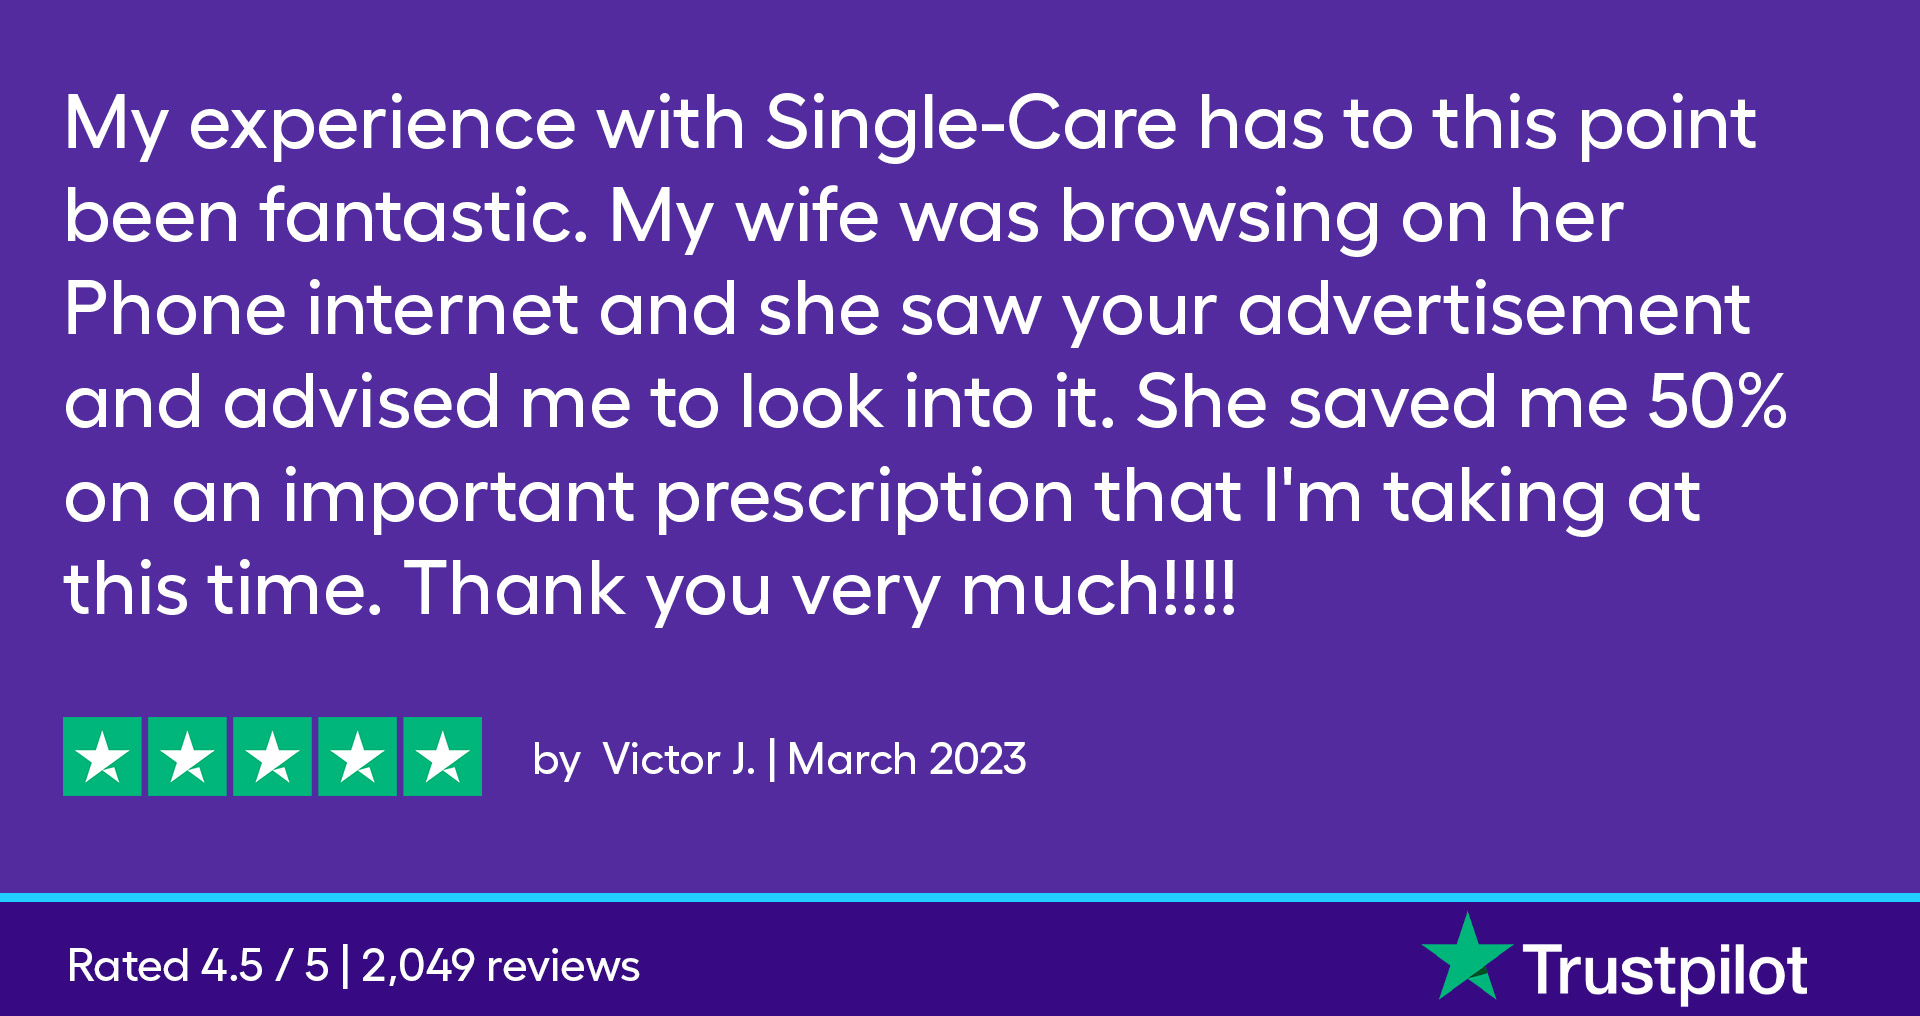 My experience with SingleCare has to this point been fantastic. My wife was browsing on her Phone internet and she saw your advertisement and advised me to look into it. She saved me 50% on an important prescription that I'm taking at this time. Thank you very much!!!